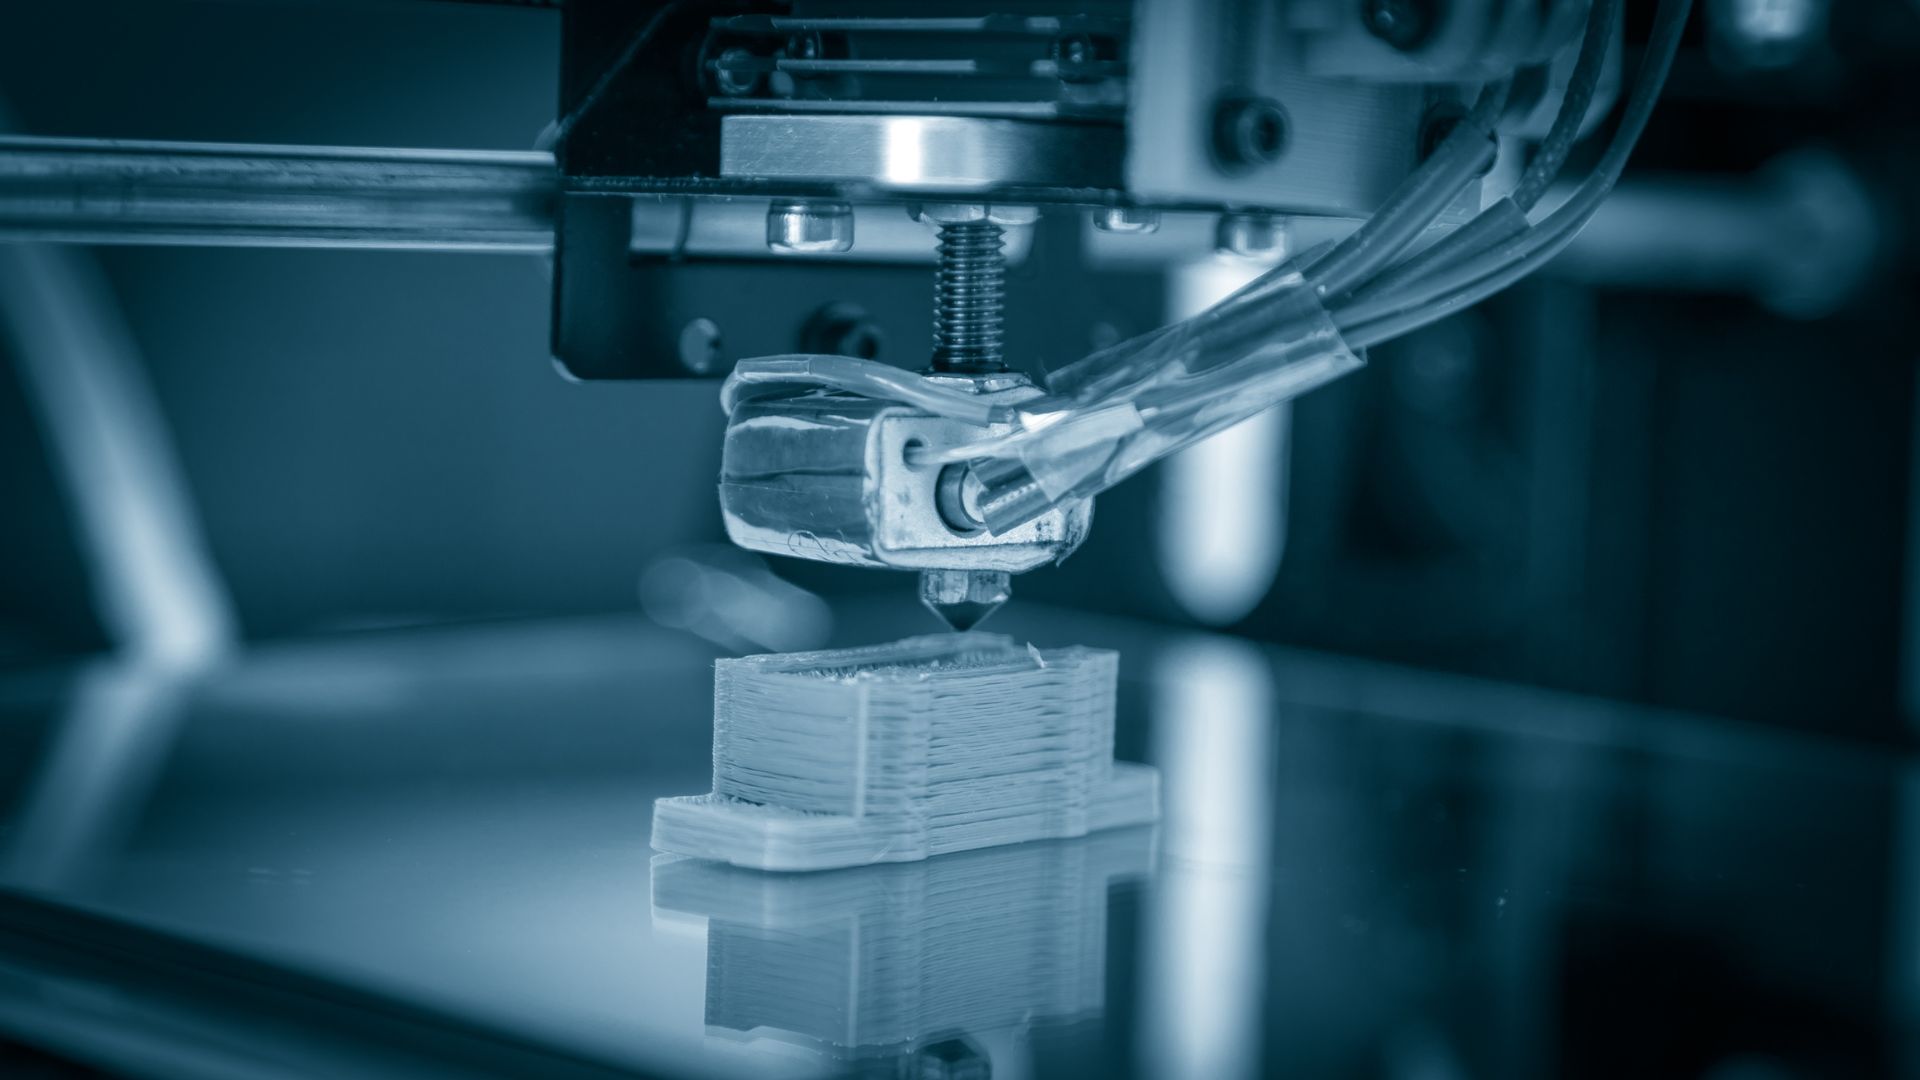 What You Need To Know About 3D Printing With Carbon Fiber